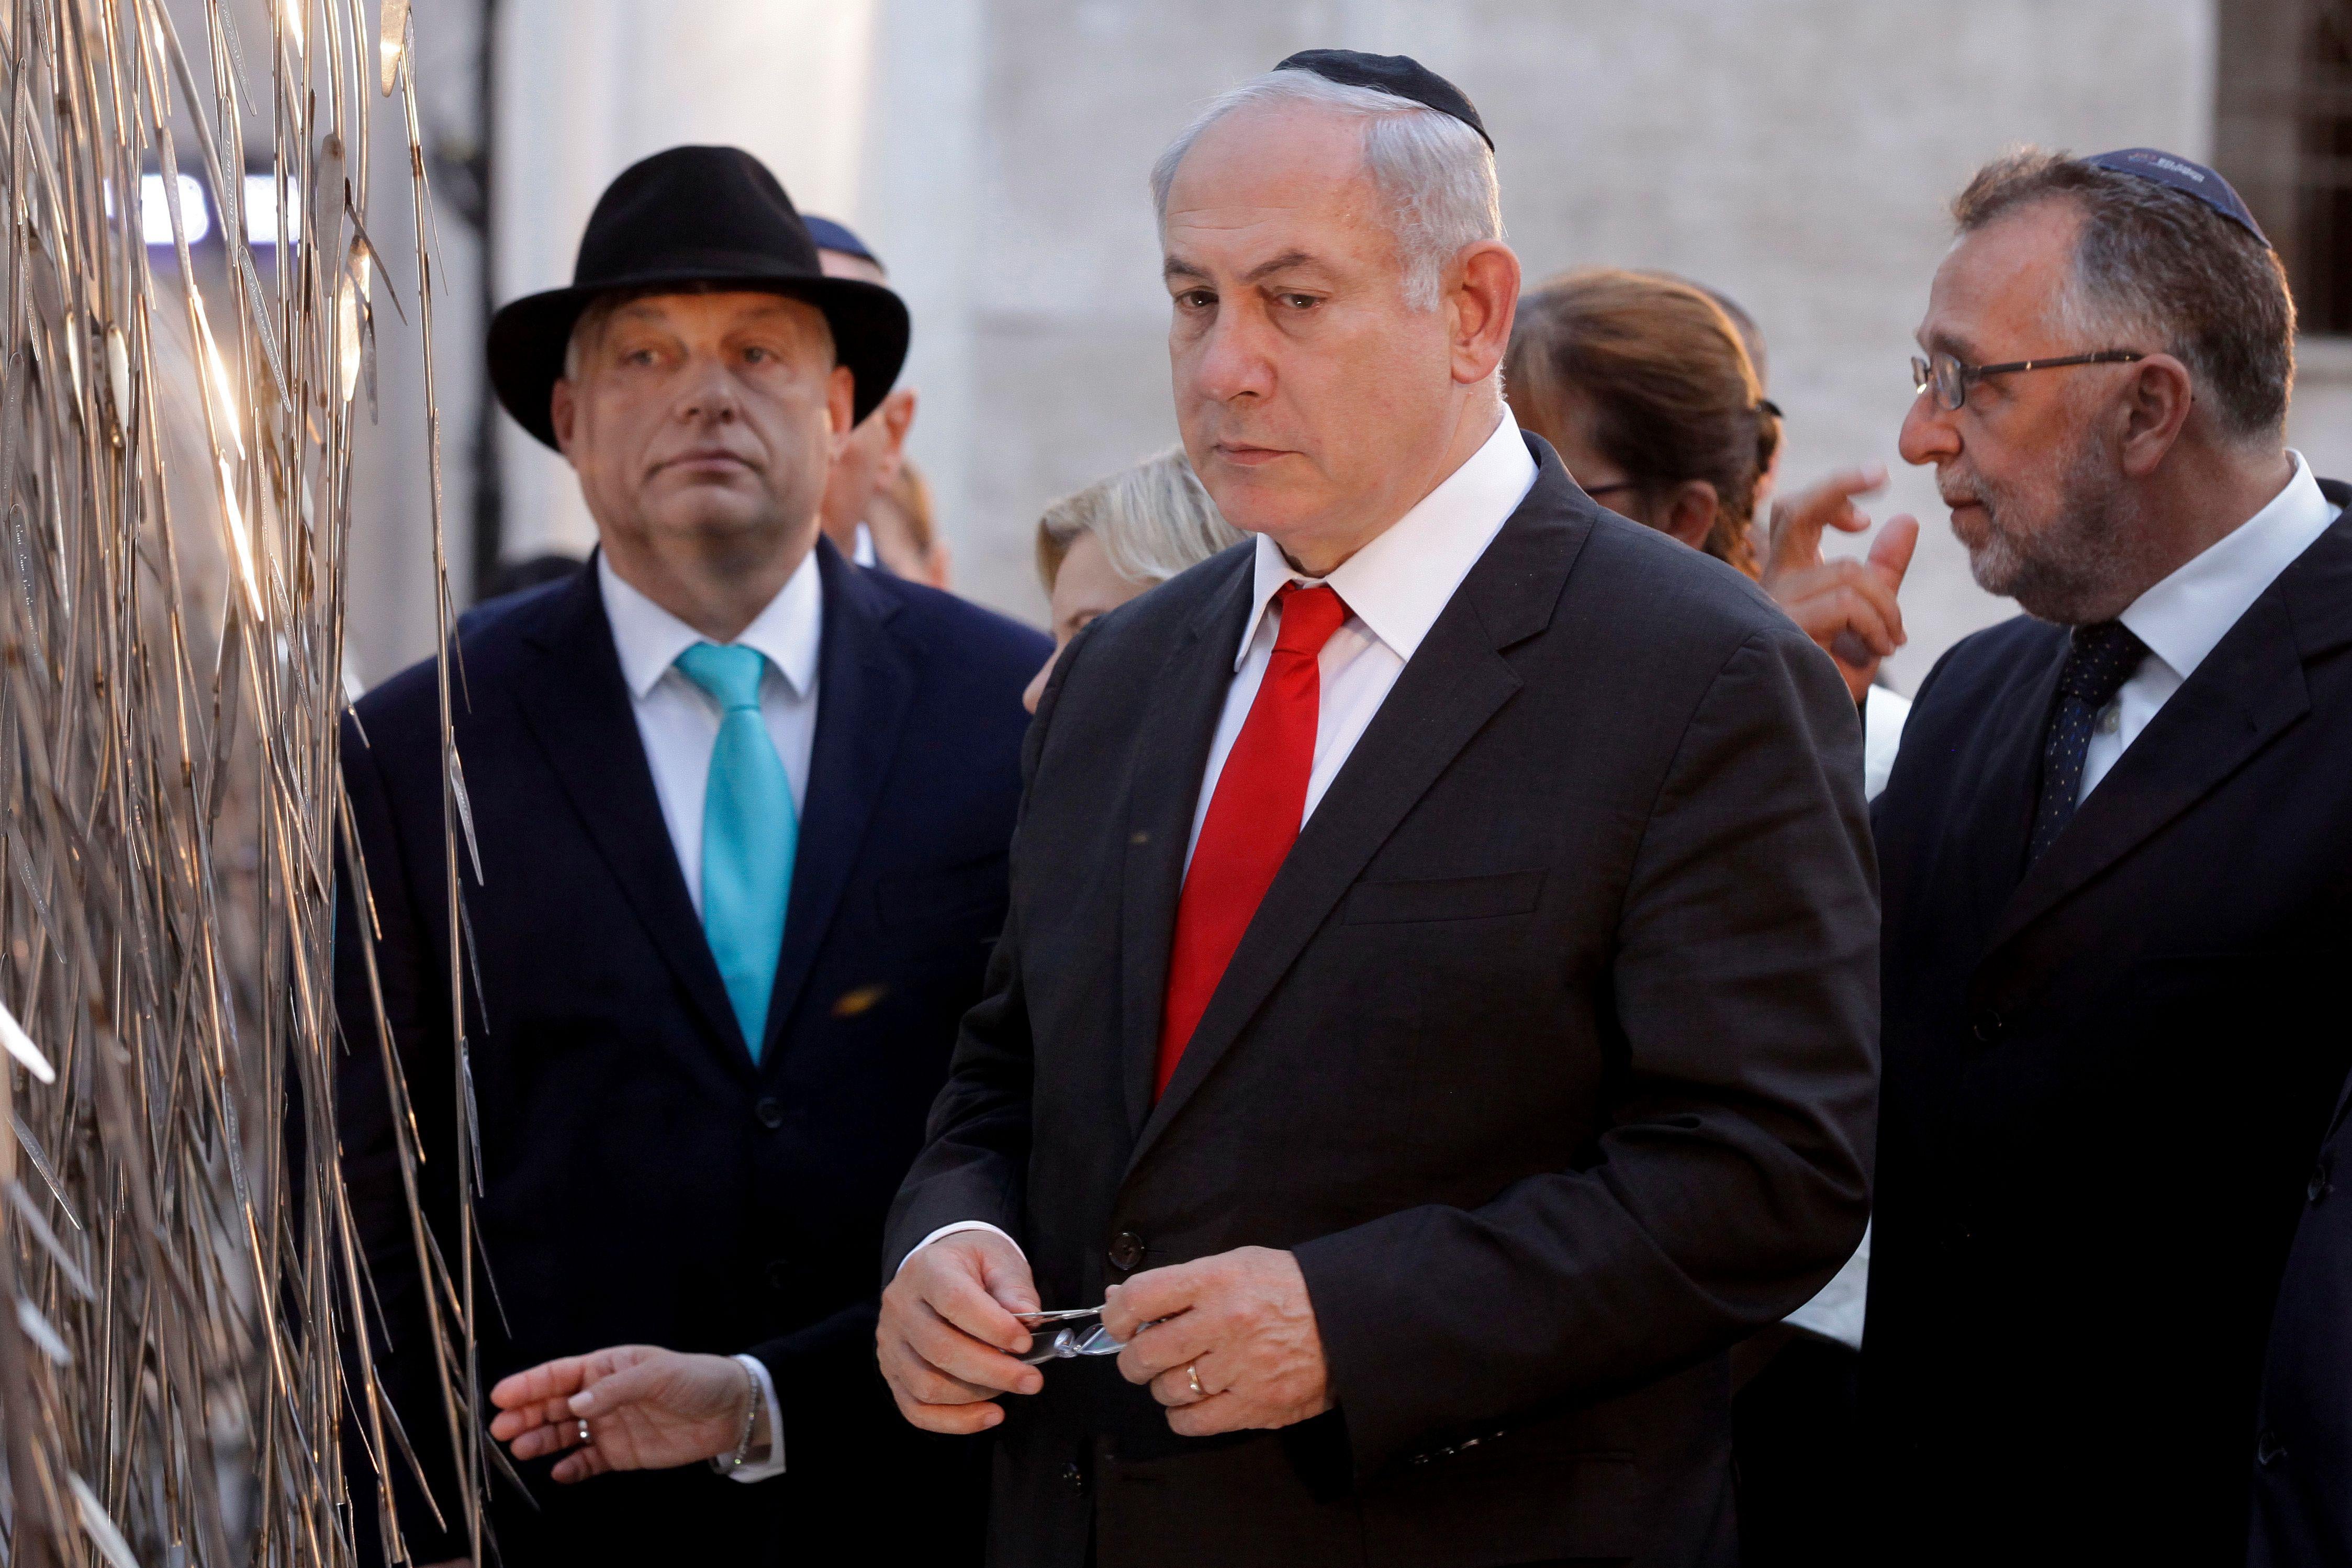 Netanyahu, Orbán, and others paying their respects.